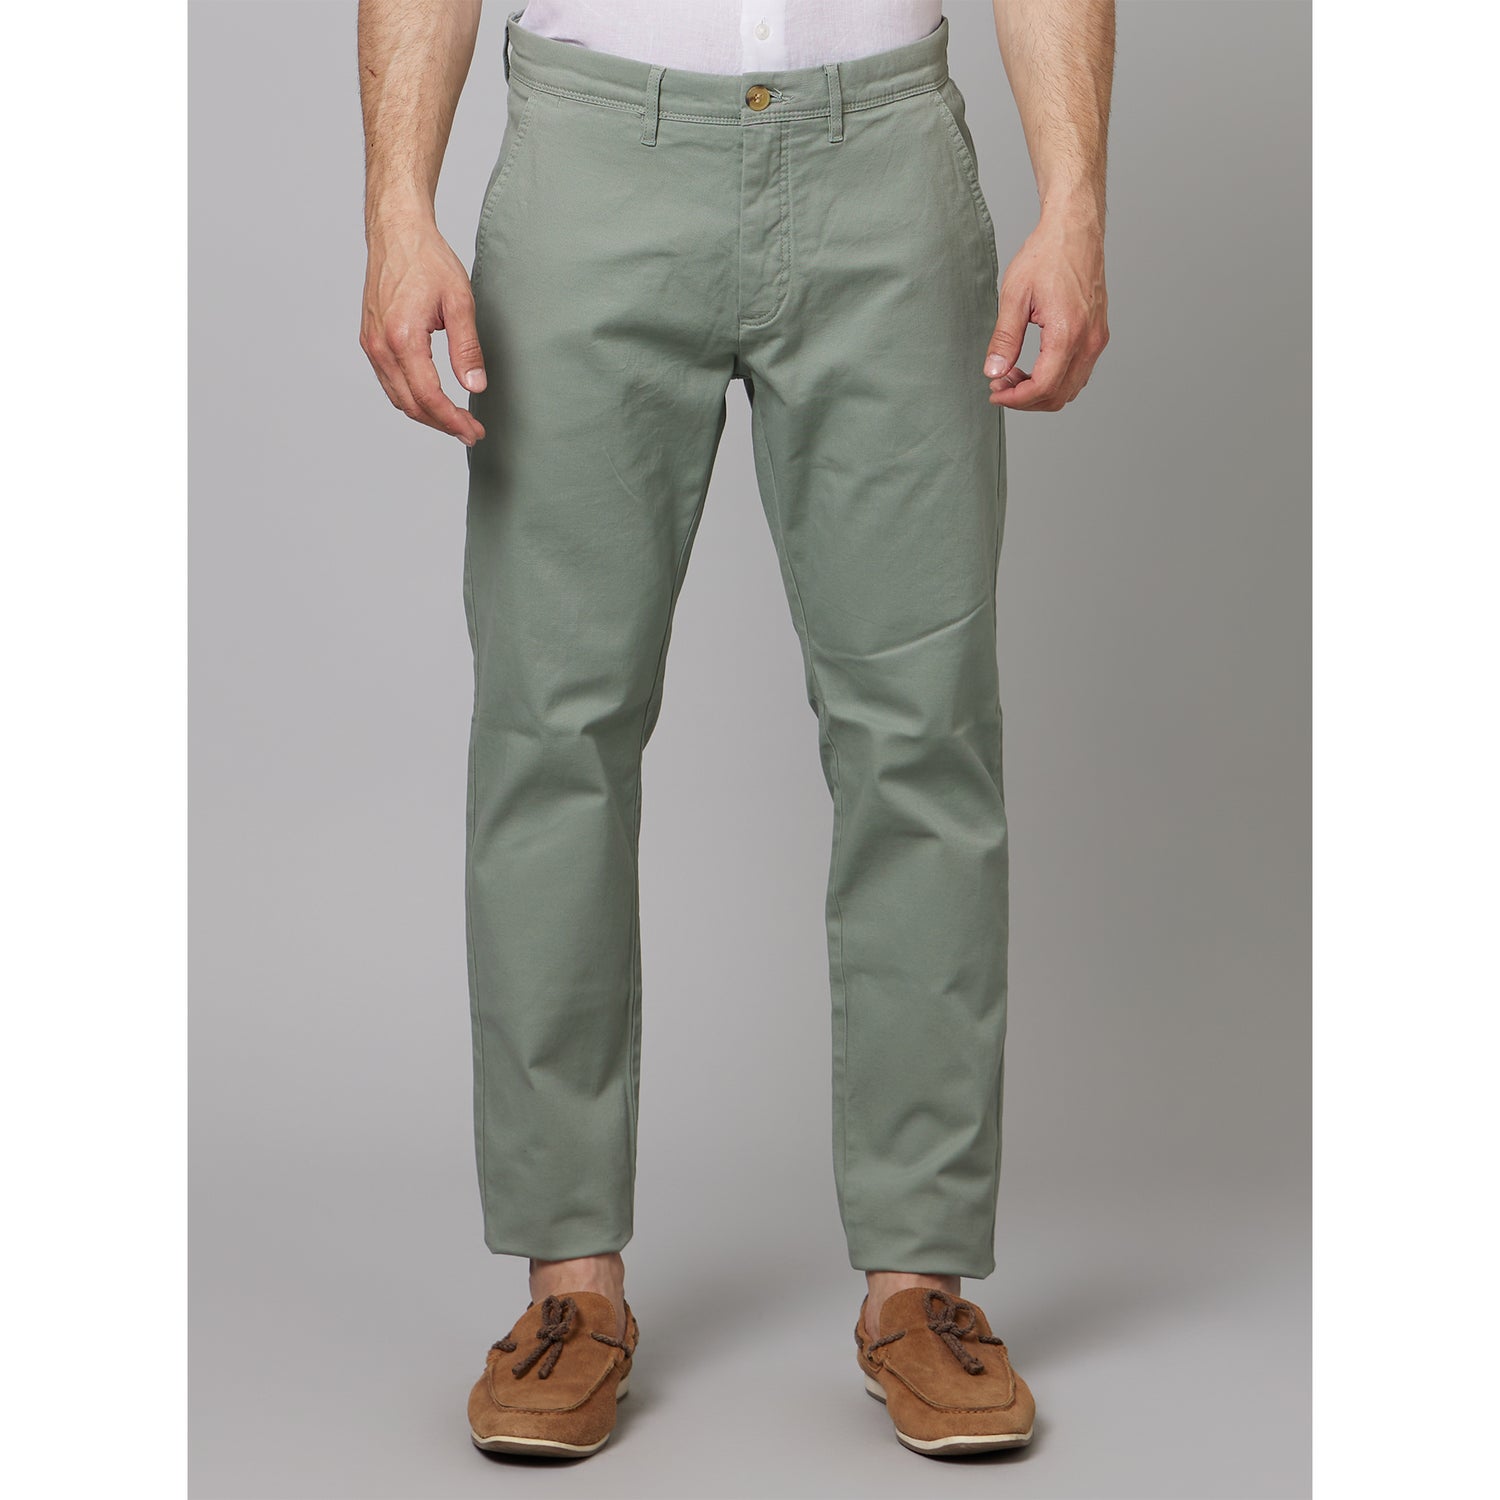 Sage Mid Rise Plain Cotton Slim Fit Chinos Trousers (TOCHARLES1)